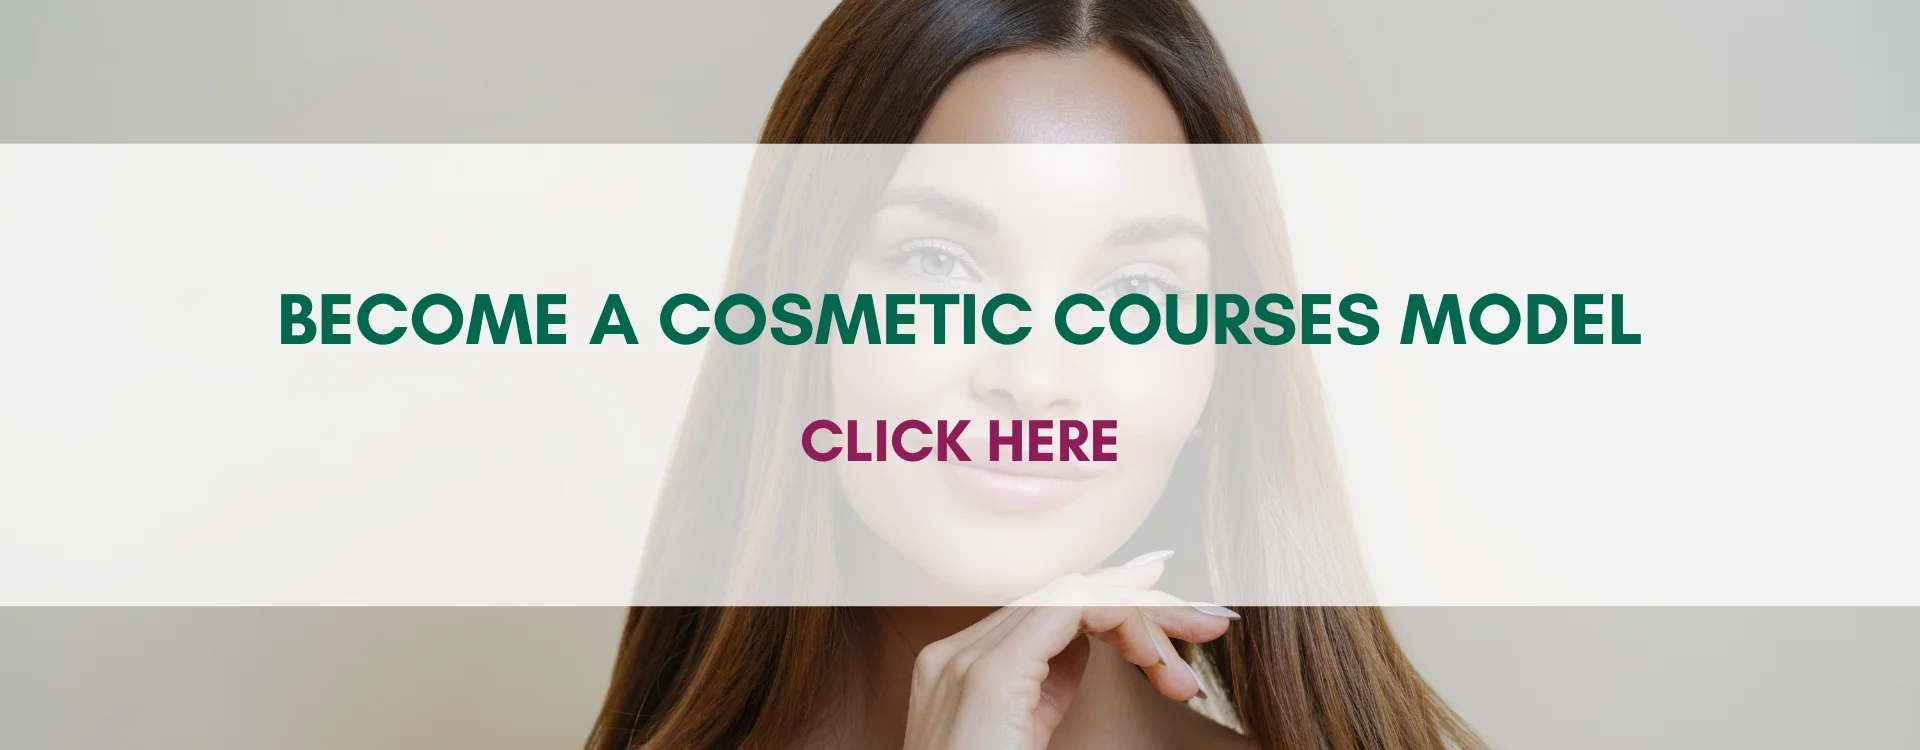 Laser Hair Removal Treatment as a Model - Cosmetic Courses